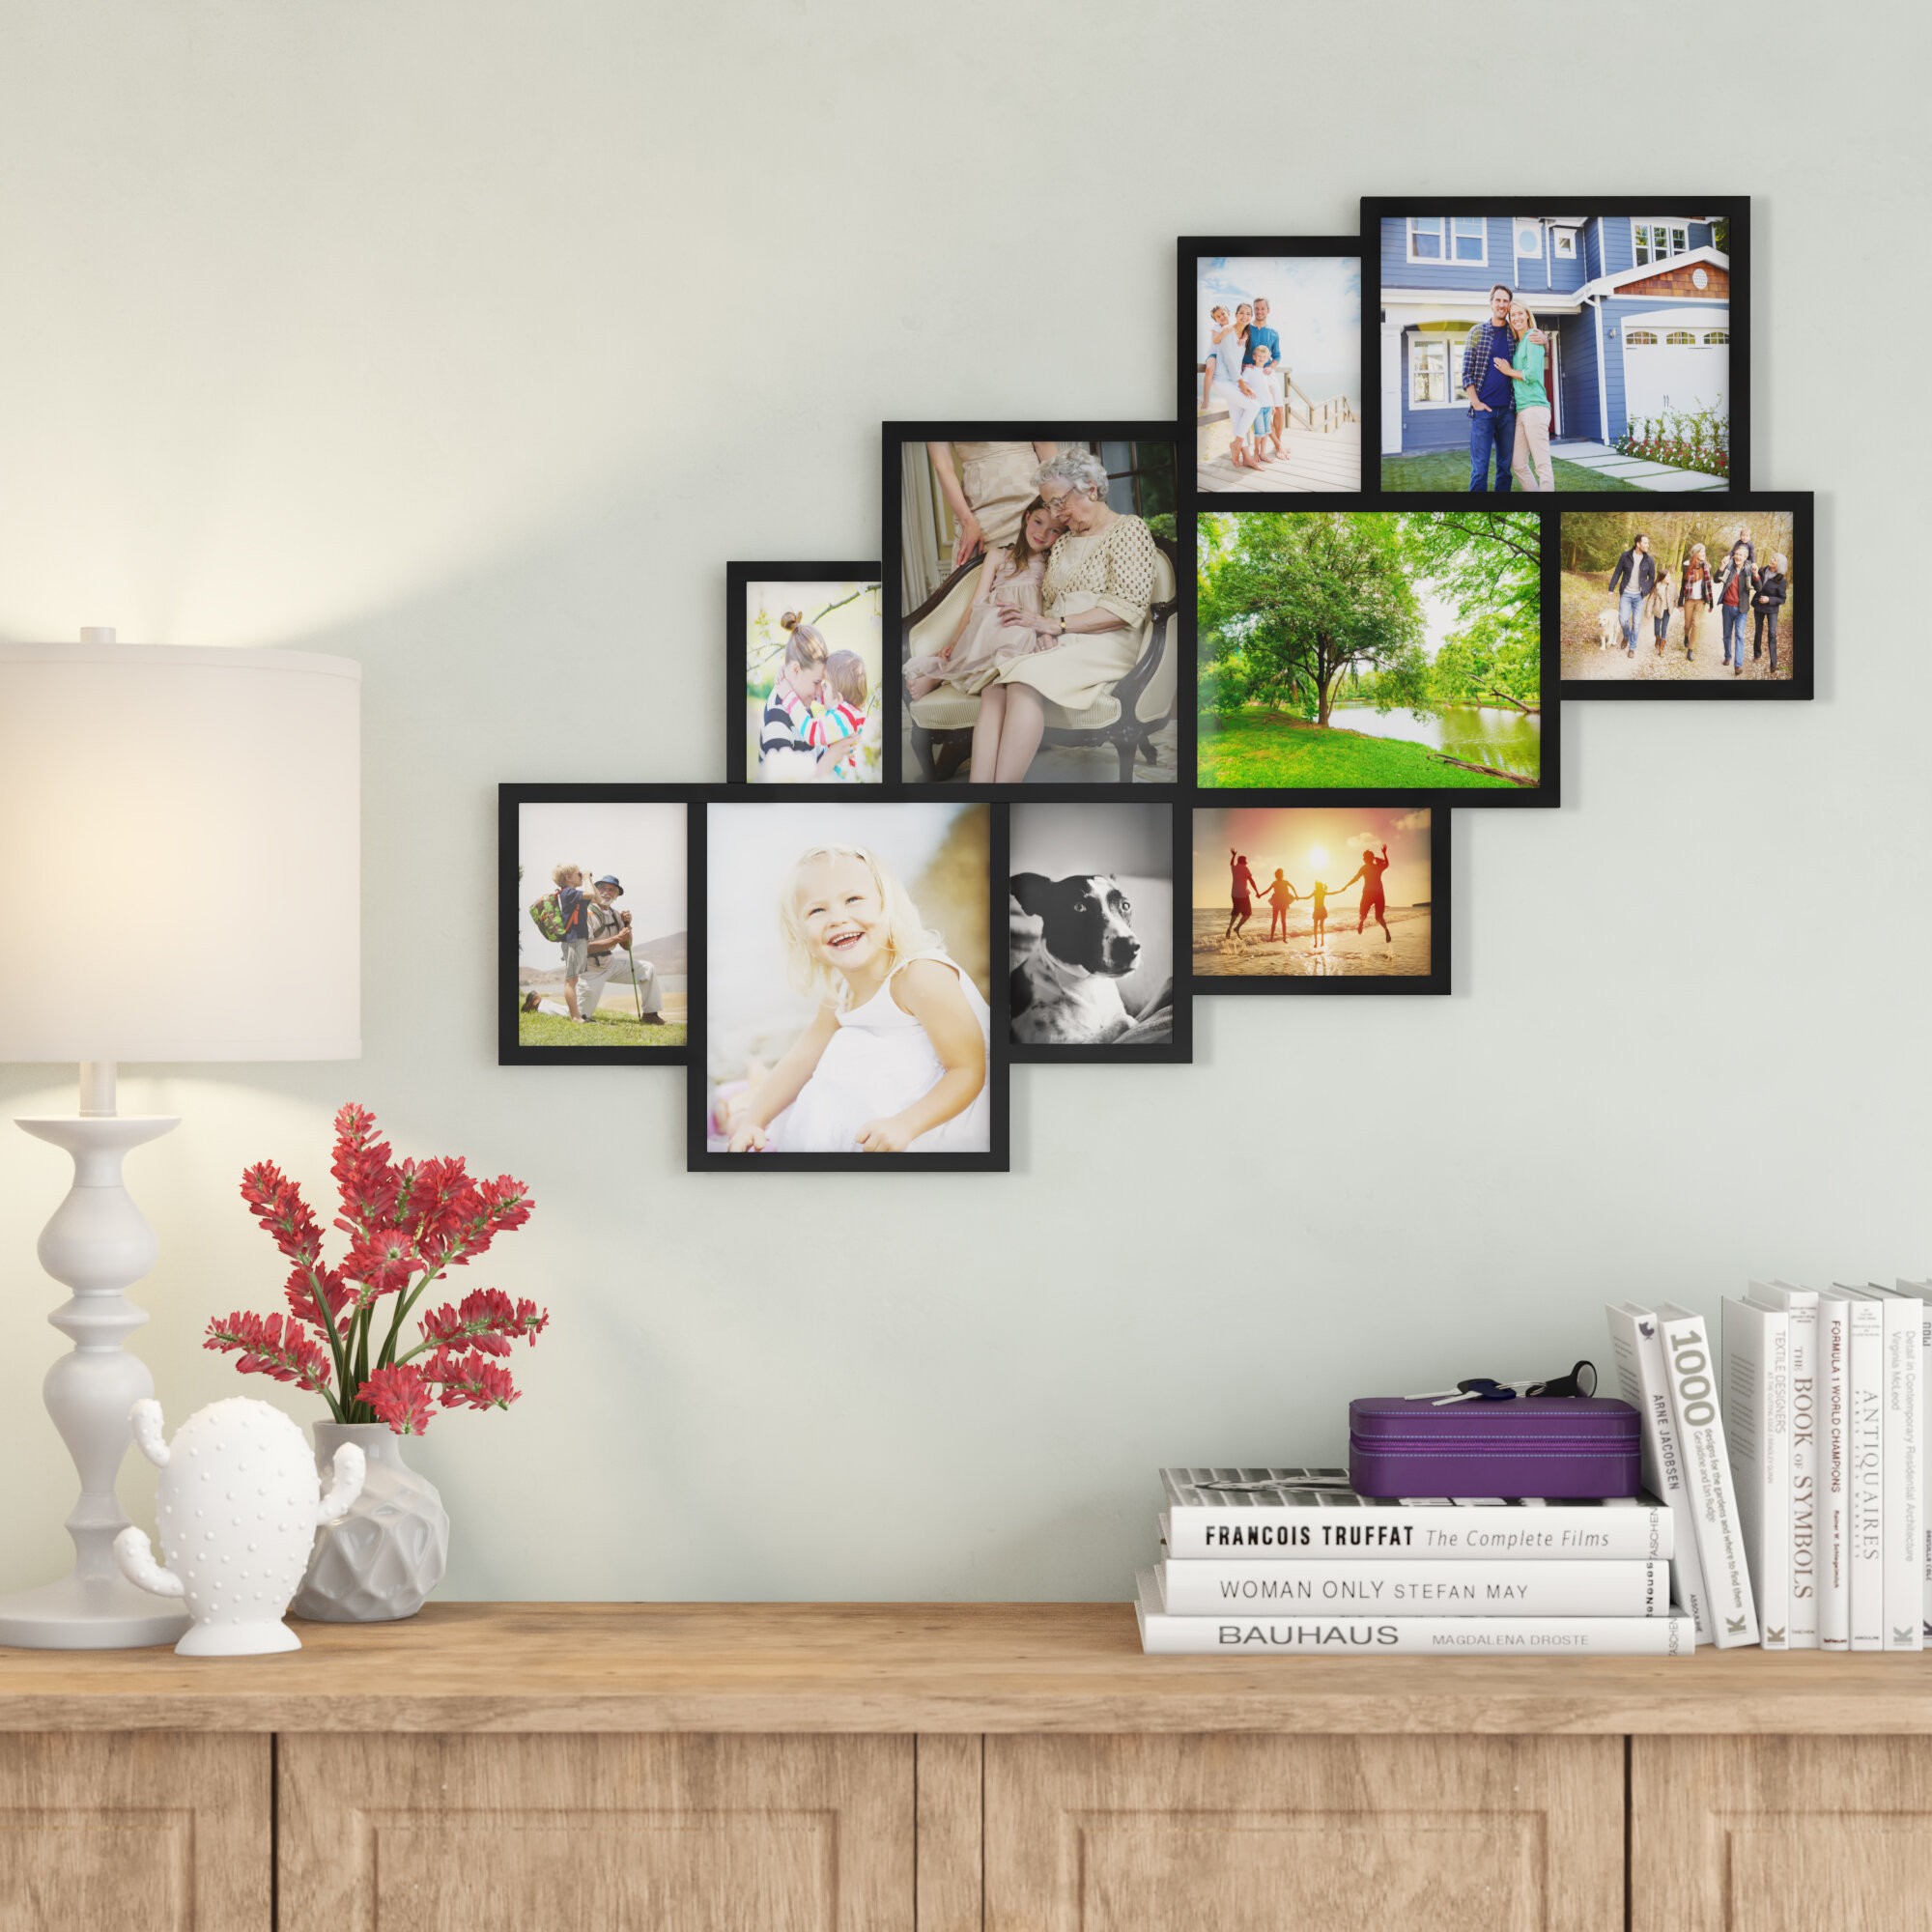 How to make a collage picture frame